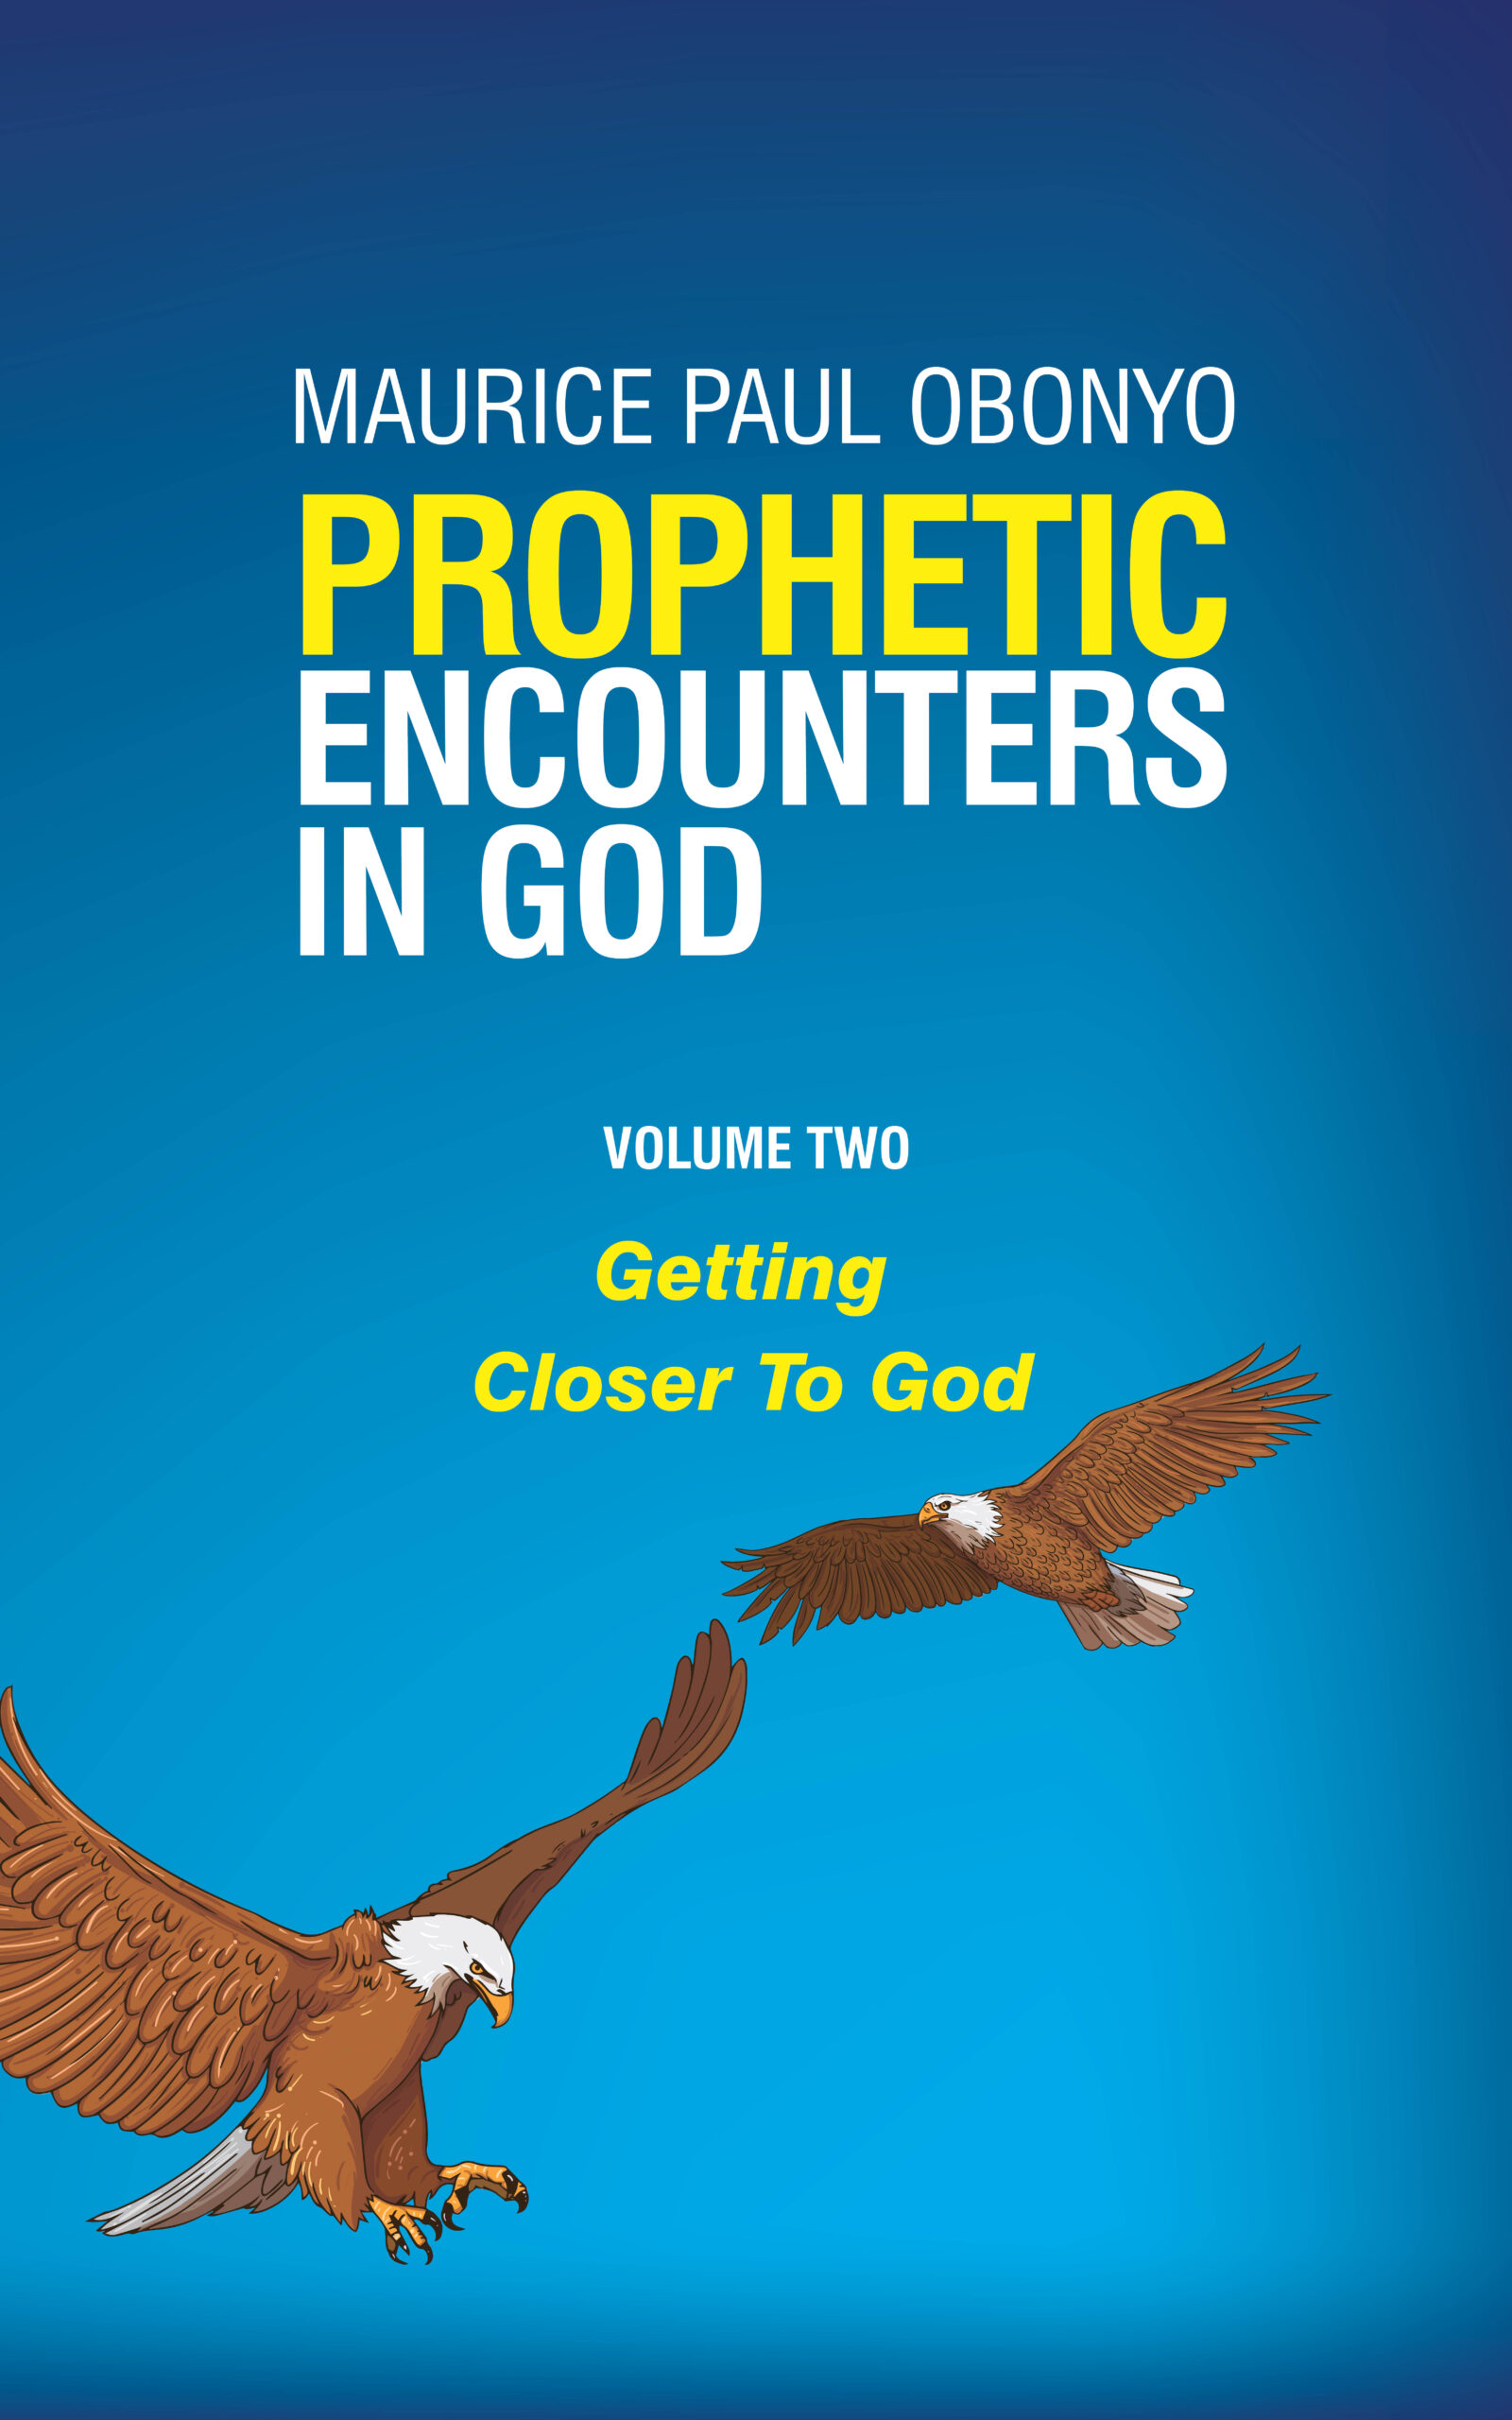 FREE: PROPHETIC ENCOUNTERS IN GOD: Getting Closer To God by MAURICE PAUL OBONYO